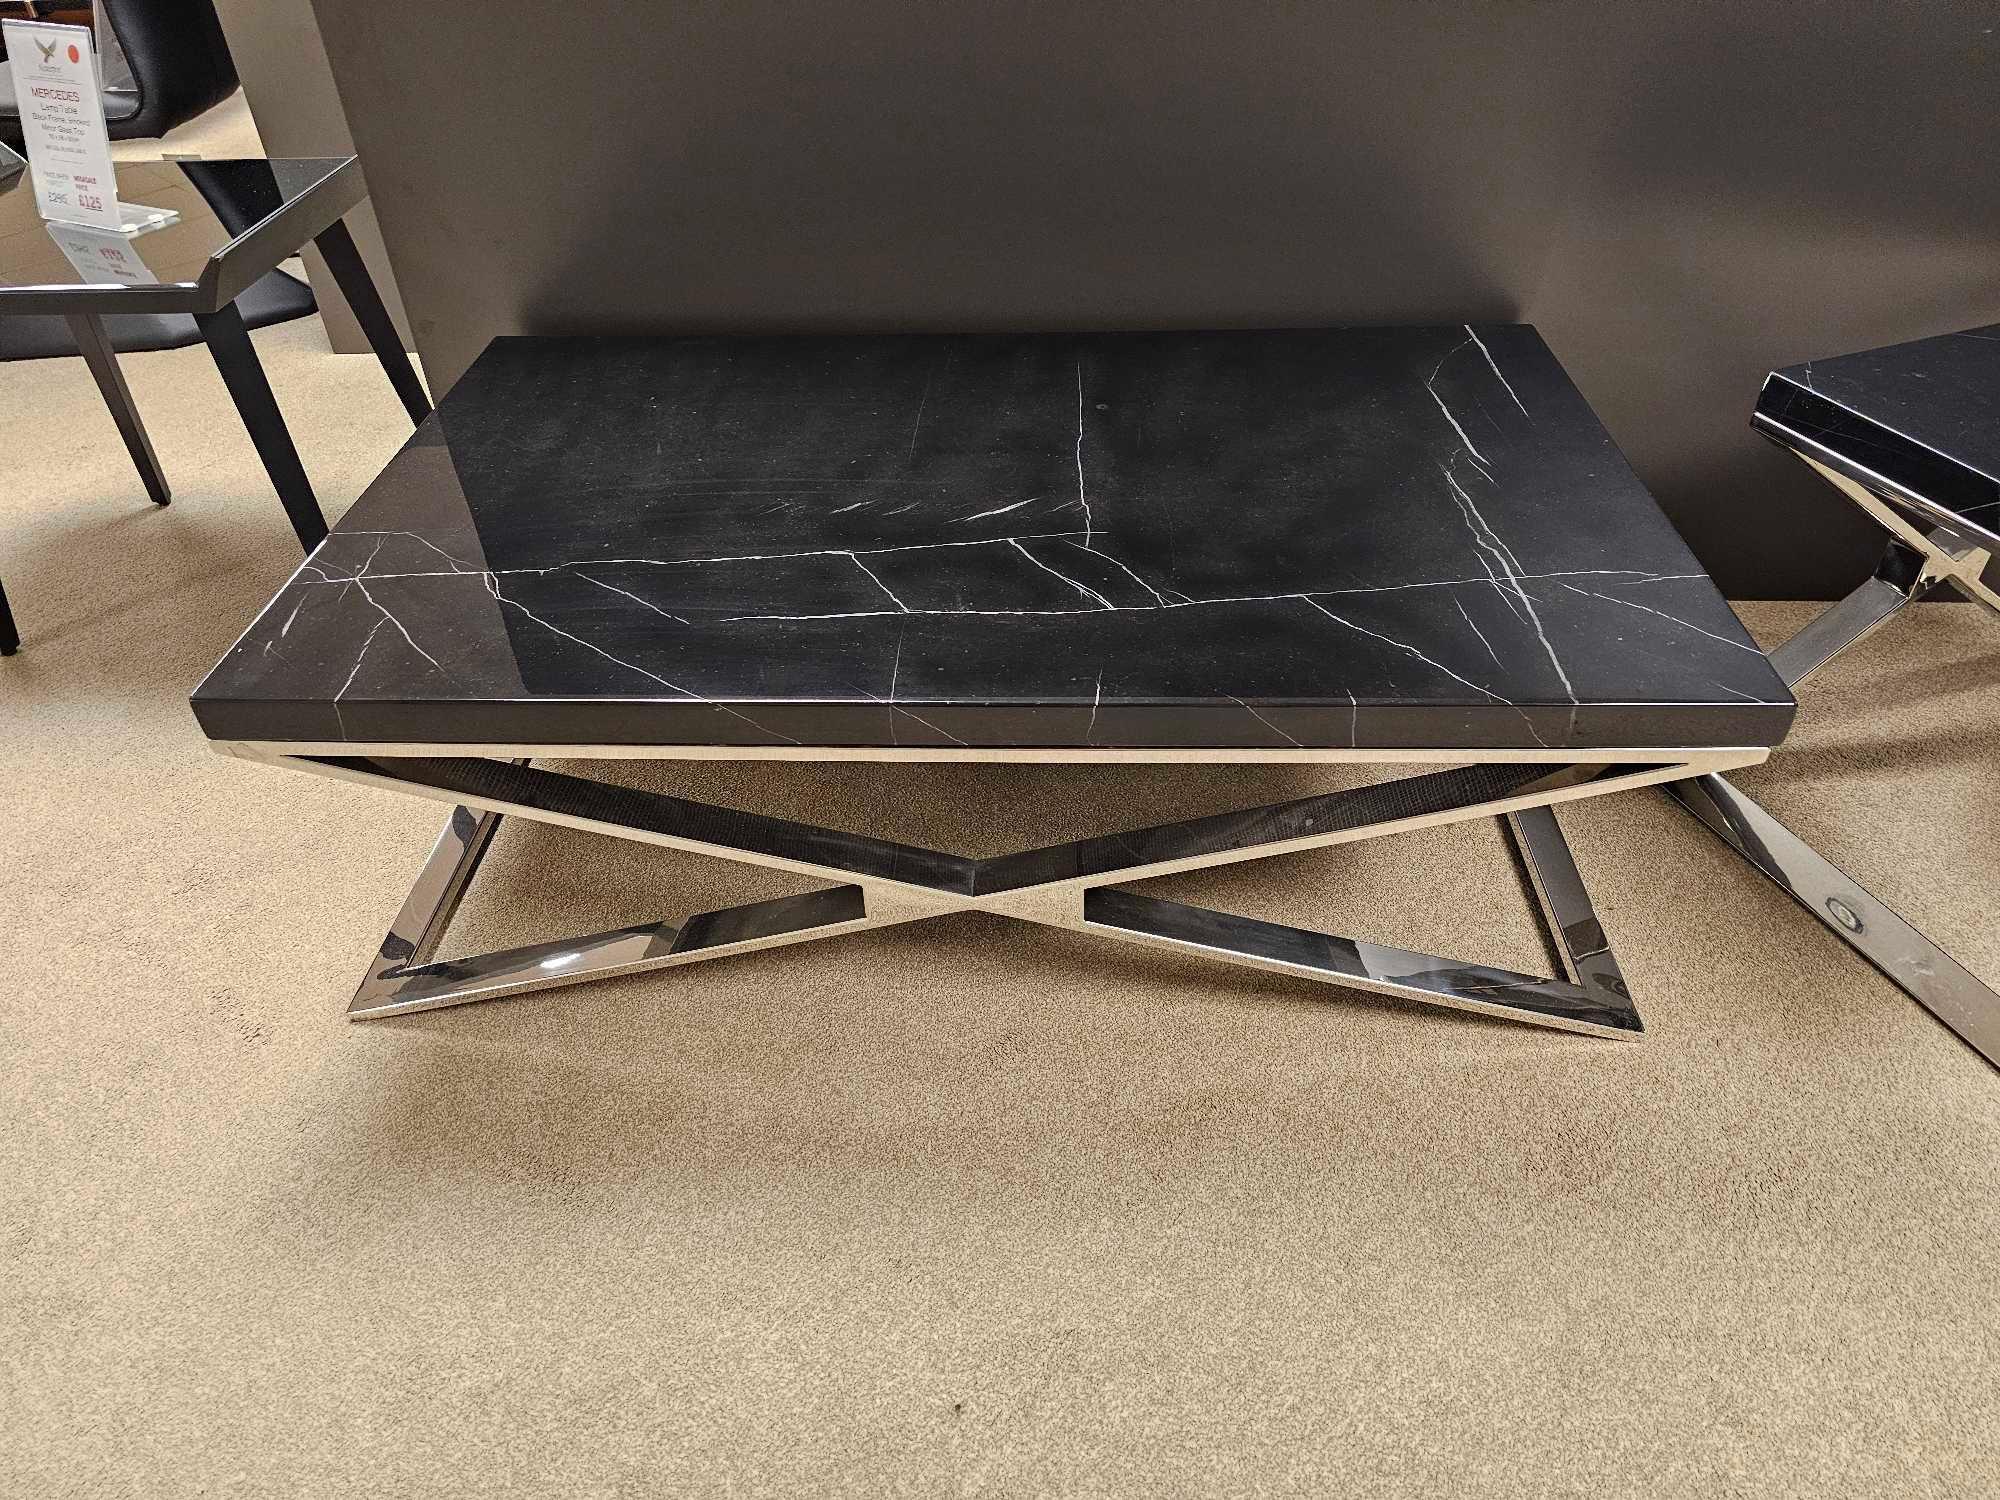 Zephyr Coffee Table by Kesterport This coffee Table has a classic frame design which we have updated